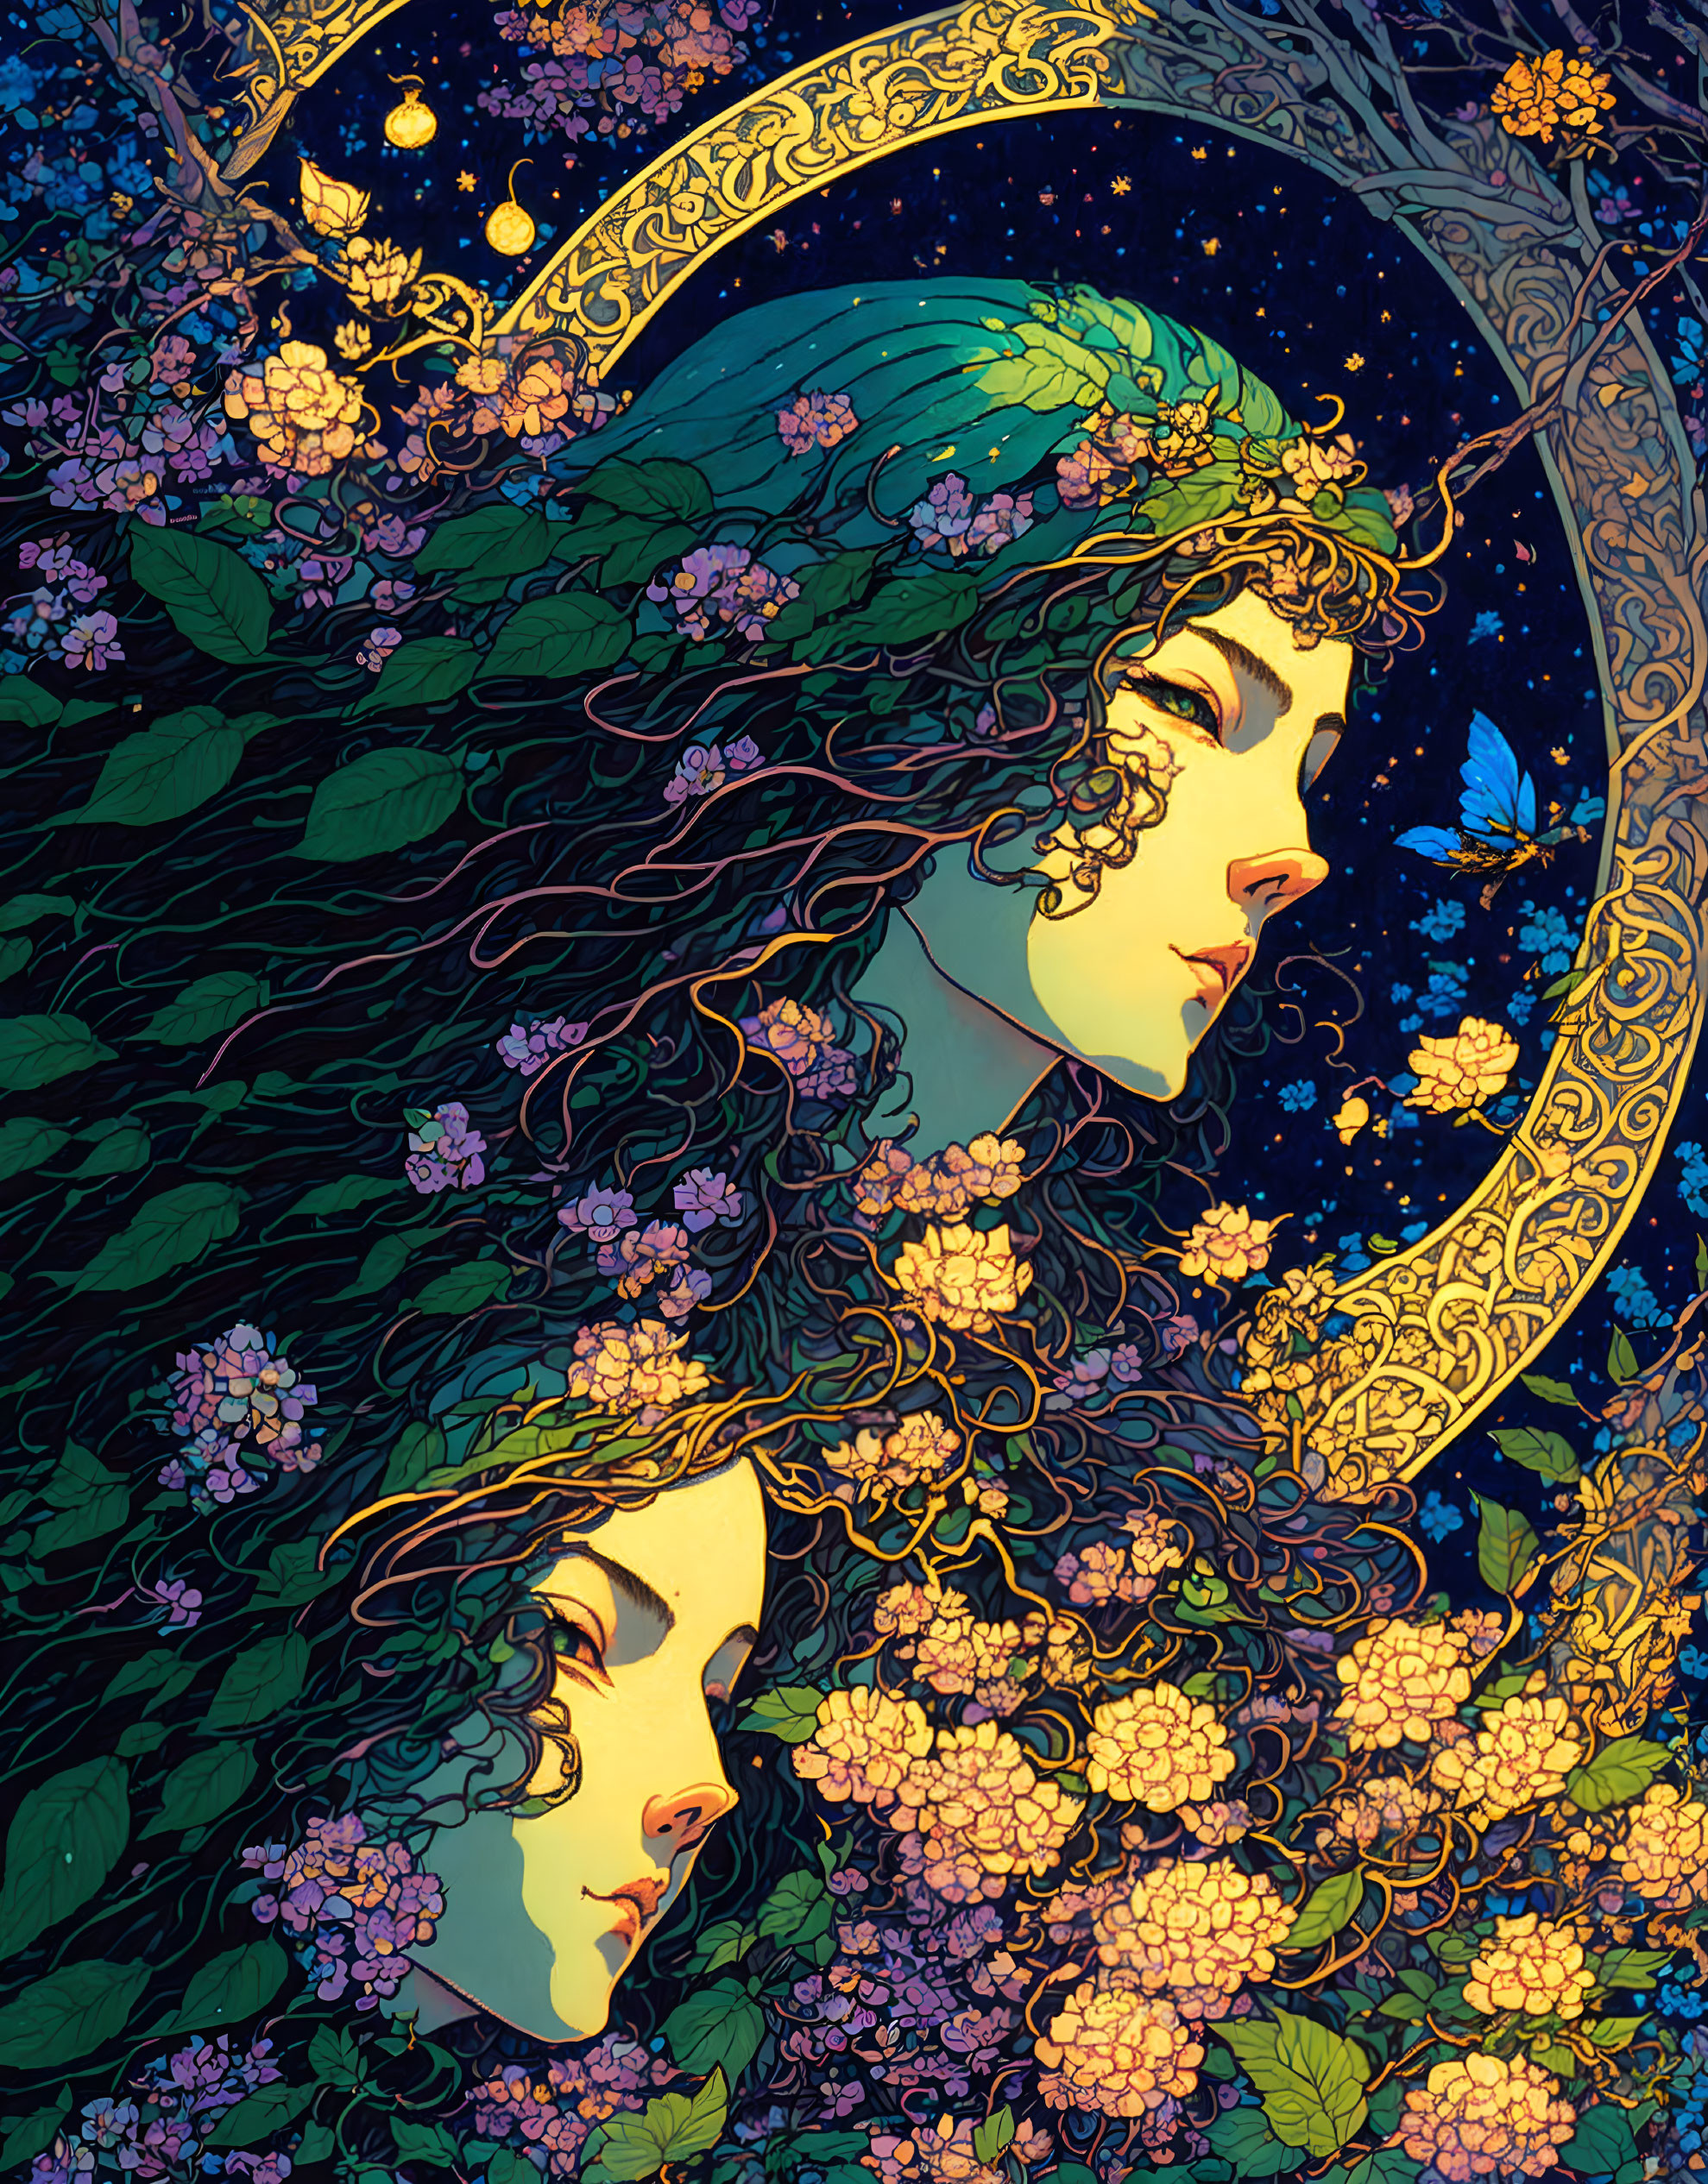 Stylized female faces with floral patterns, moon, and butterflies